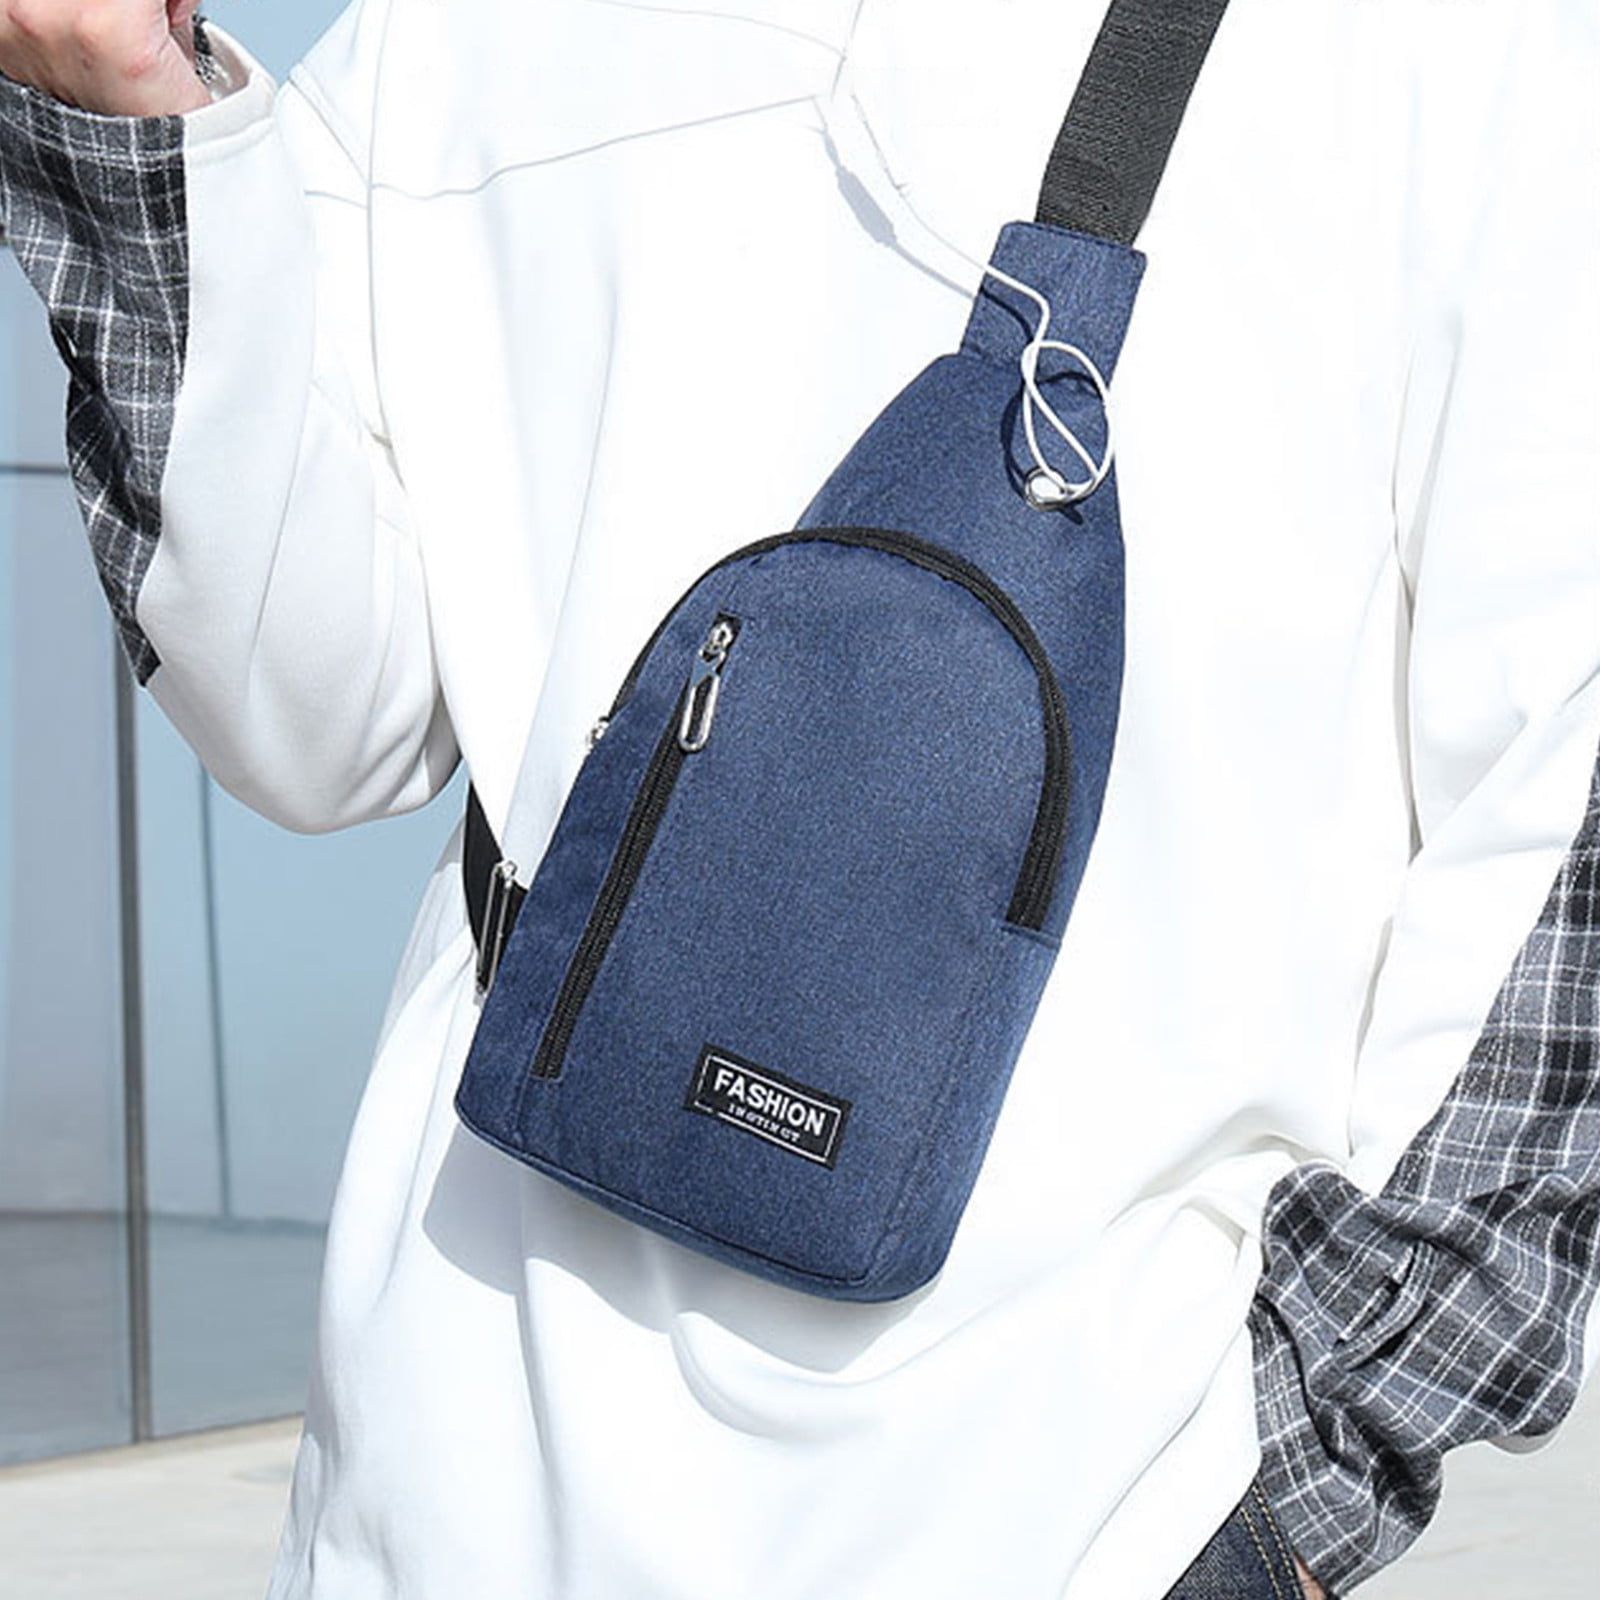 KIHOUT Promotion Small Sling Bag Crossbody Chest Shoulder Water Sling Purse  Strap Travel Bag For Men Women Boys With Earphone Hole